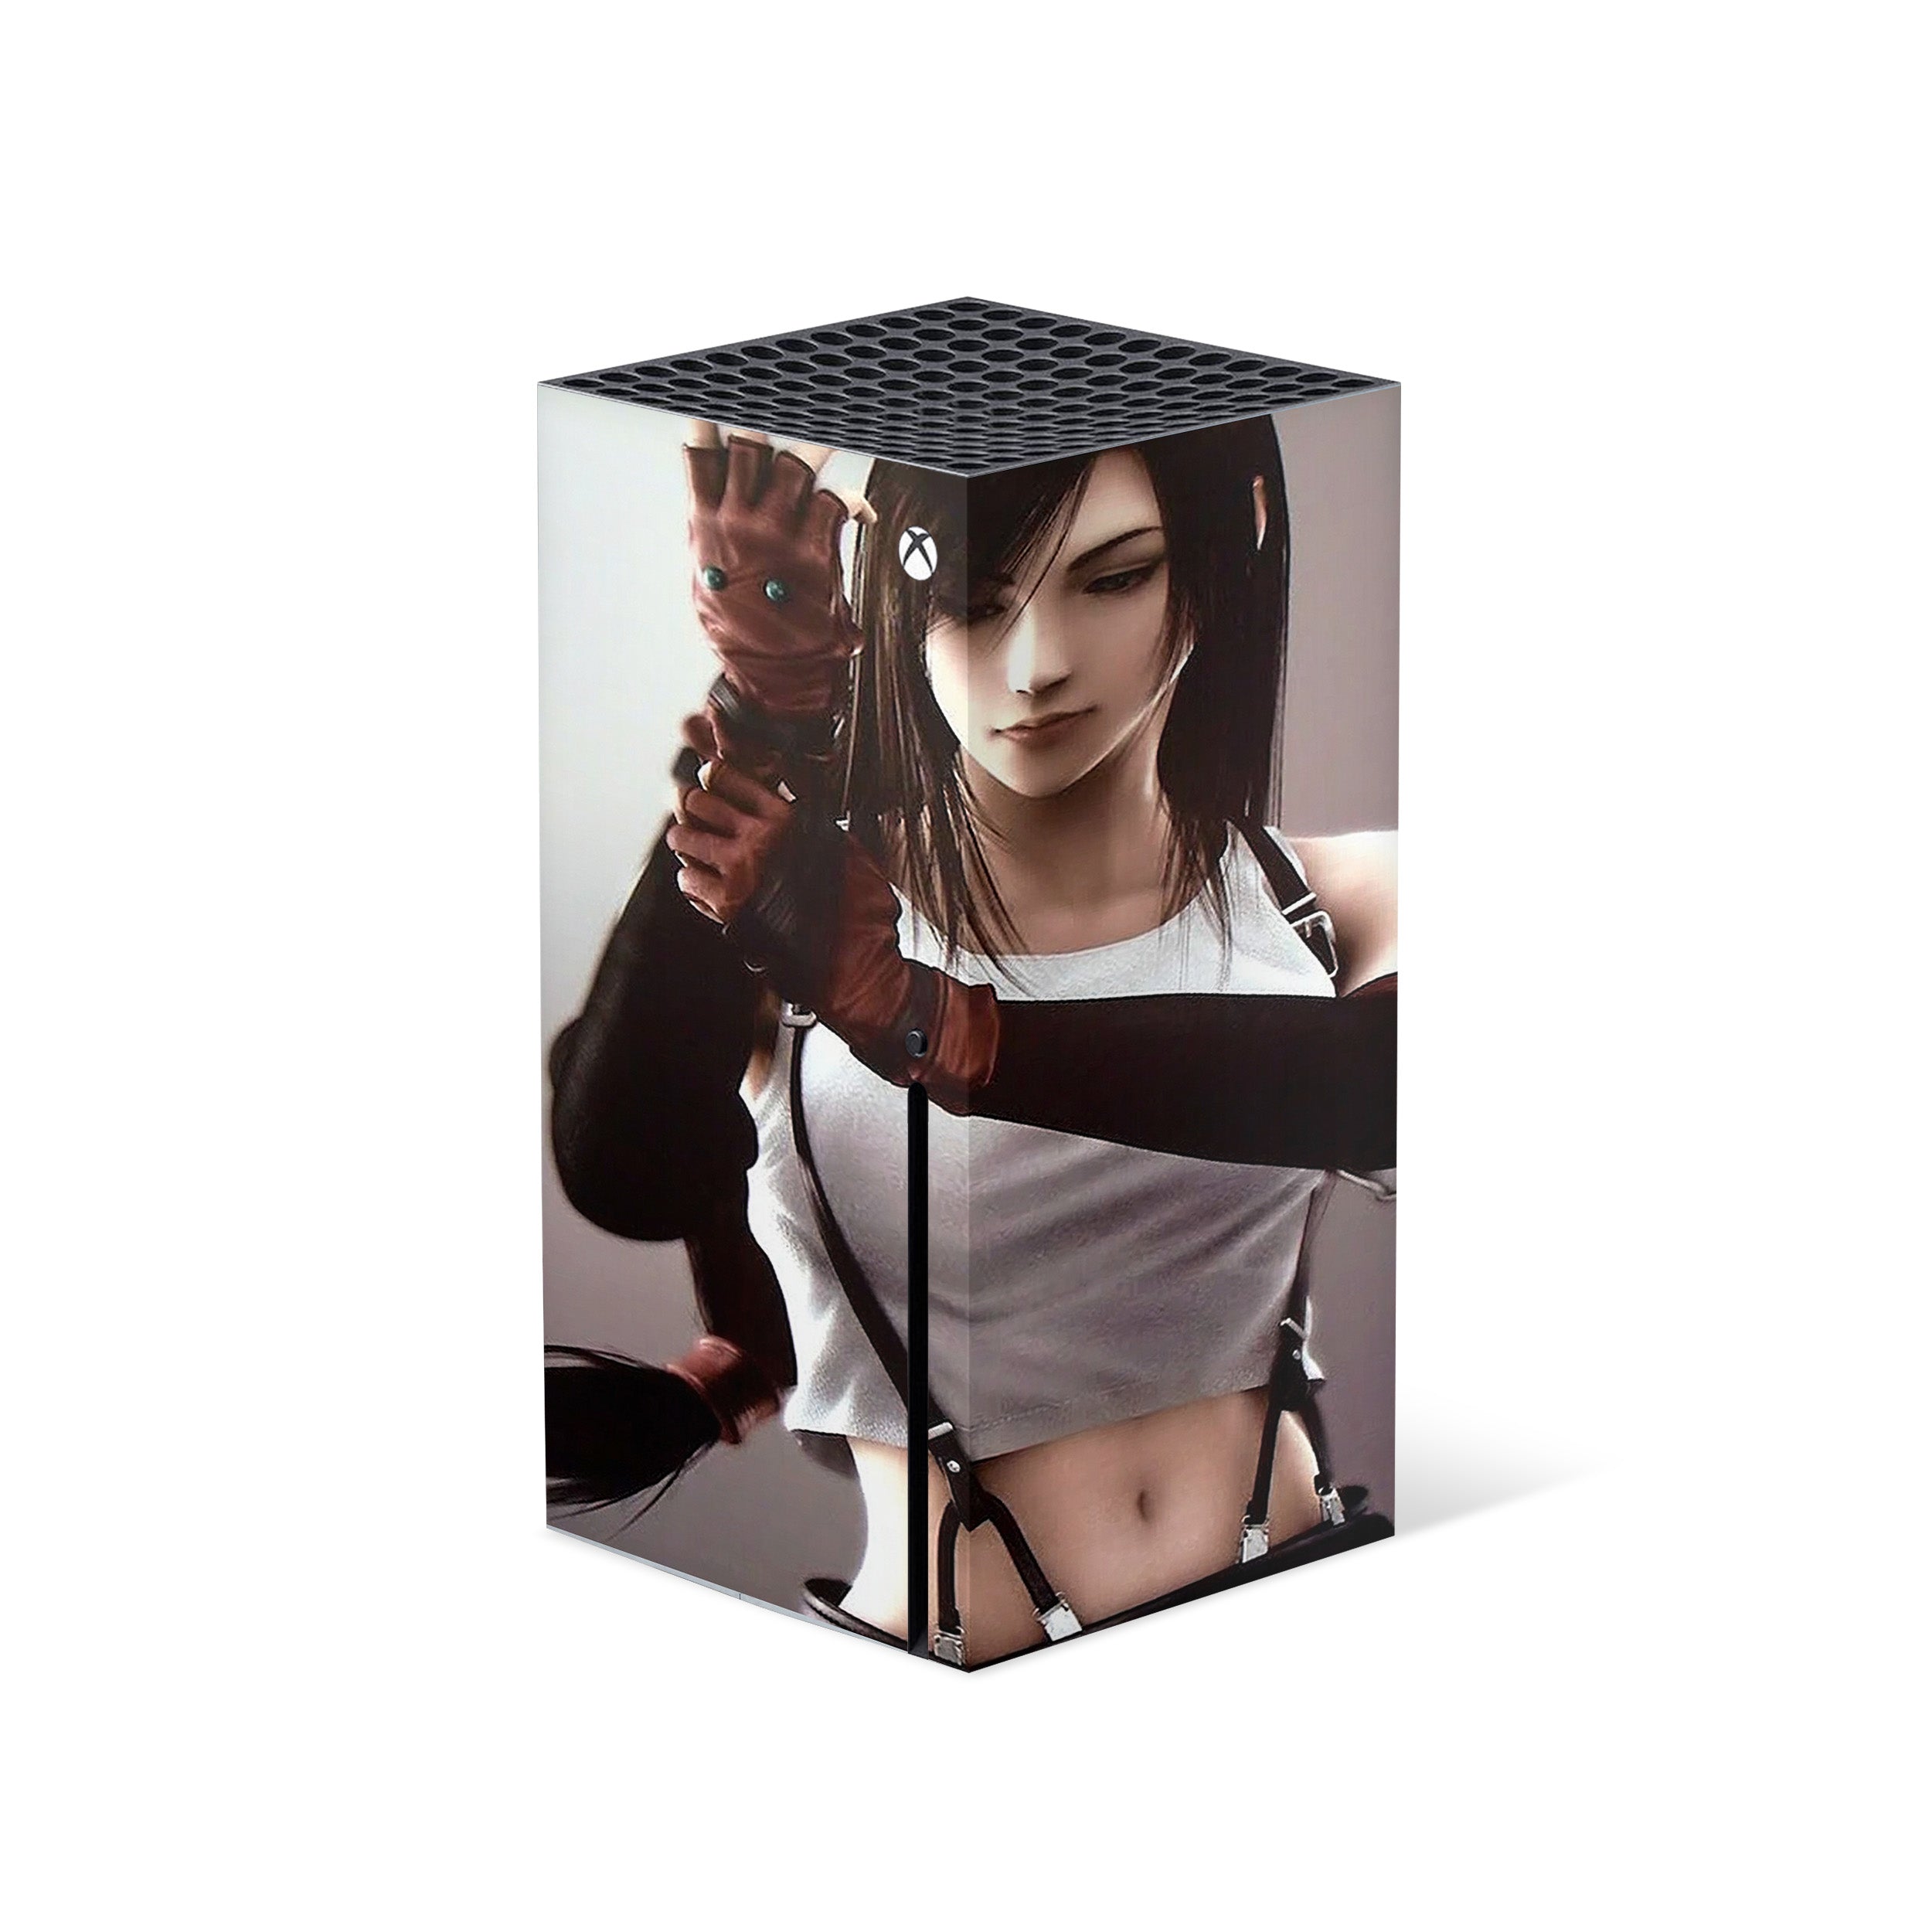 A video game skin featuring a Final Fantasy 7 Tifa design for the Xbox Series X.